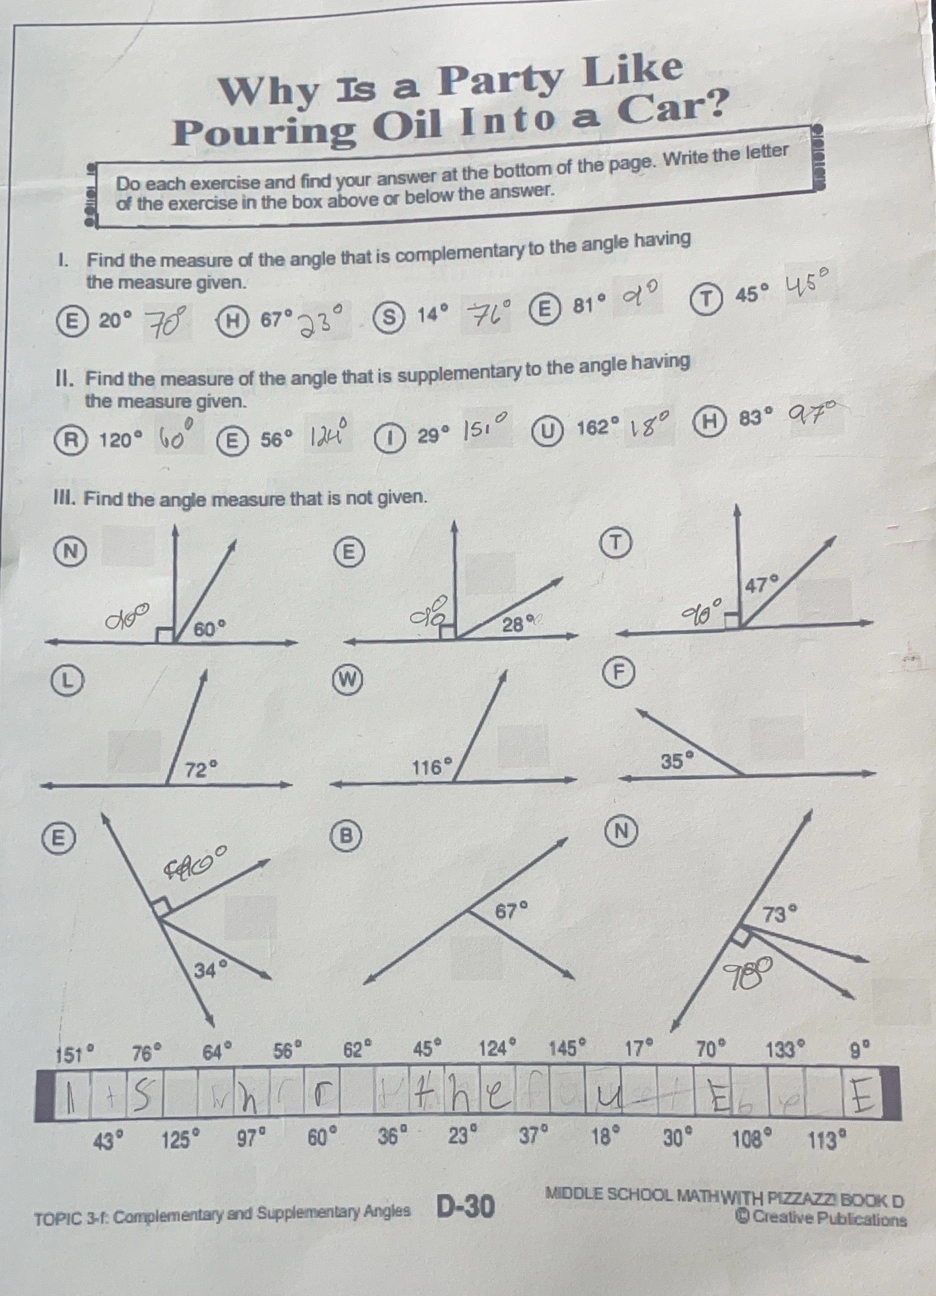 Why Is a Party Like Pouring Oil Into a Car? Do each exercise and find your answer at the bottom of the page. Write the letter of the exercise in the box above or below the answer. I. Find the measure of the angle that is complementary to the angle having the measure given. E 20 ° 70 ° H67°23° S 14 ° E 81 ° yo 45 ° 45° Il. Find the measure of the angle that is supplementary to the angle having the measure given. 120 ° lo E 56° 29 ° |5 ° 162 ° delta '0 A 83 ° 97 III. Find the angle measure that is not given E E B 151 ° 76 ° 64 ° 56 ° 62 ° 45 ° 124 ° 145 ° 17 ° 70 ° 133 ° 9 ° 43 ° 125 ° 97 ° 60 ° 36 ° 23 ° 37 ° 18 ° 30 ° 108 ° 113 ° TOPIC 3-1: Complementary and Supplementary Angles D-30 MIDDLE SCHOOL MATHWITH PIZZAZZ BOOK D Q Creative Publicalions